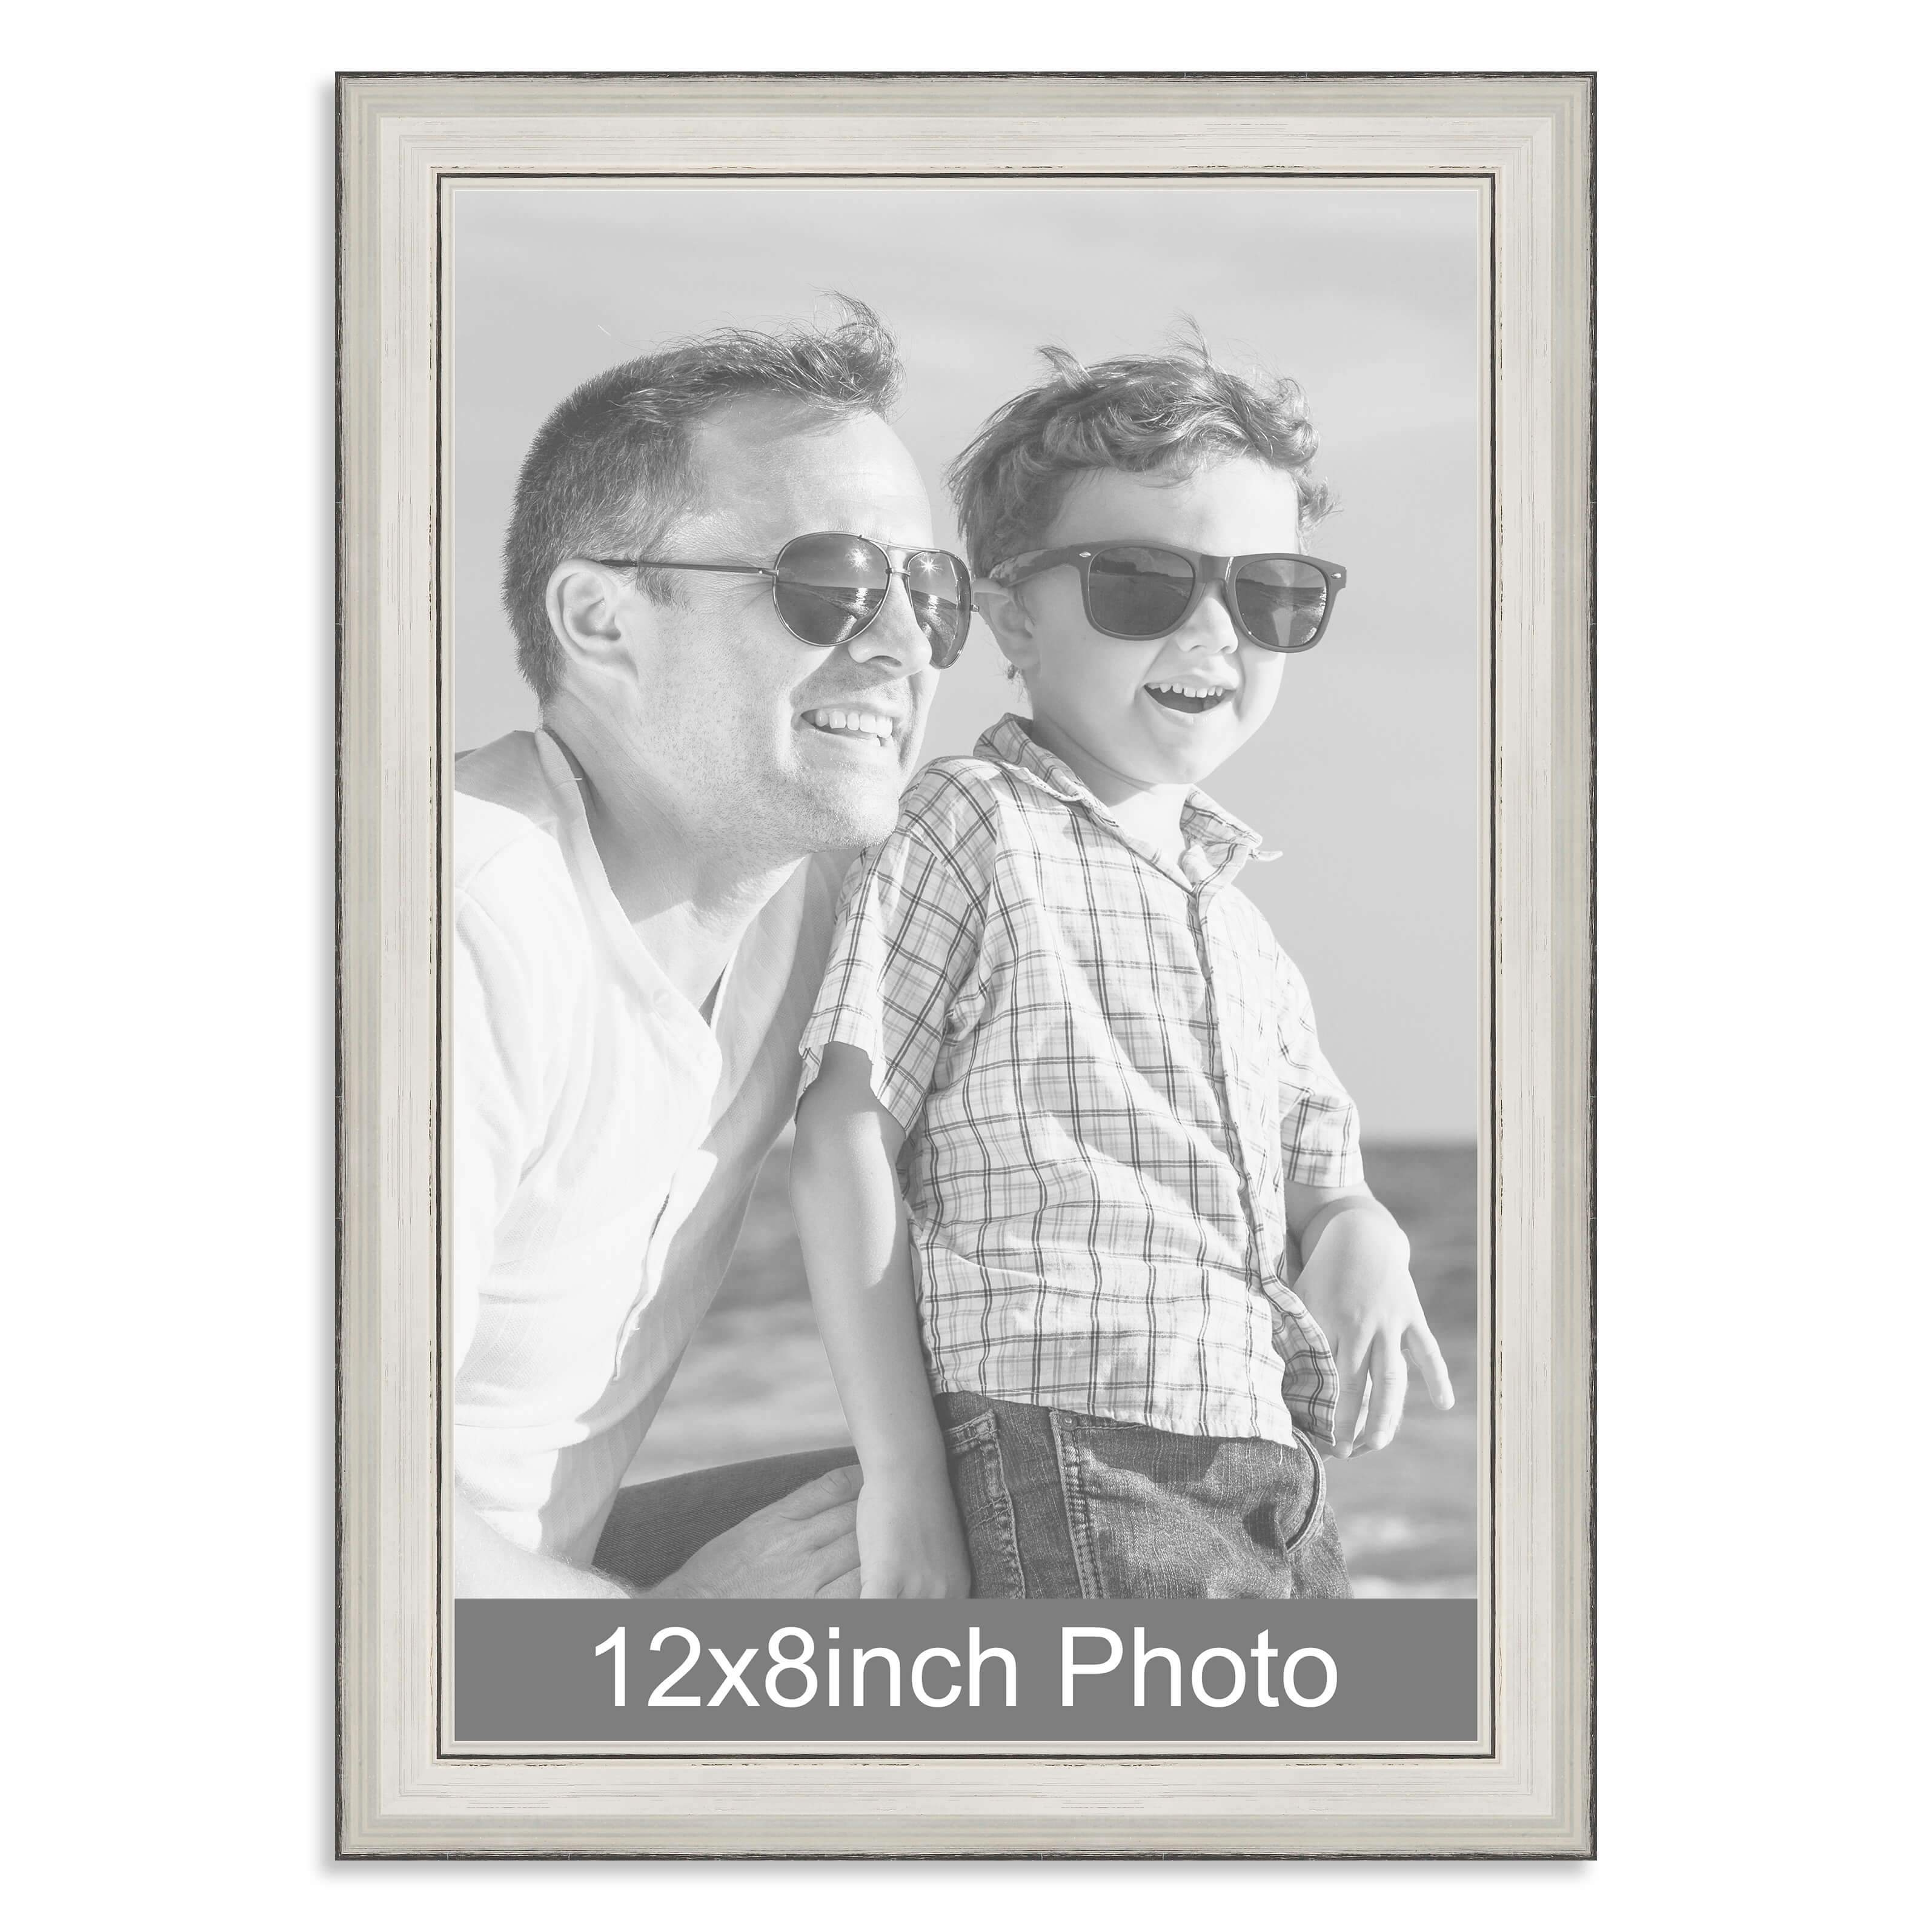 12 x 8inch Silver Wooden Photo Frame for a 12×8/8x12in photo